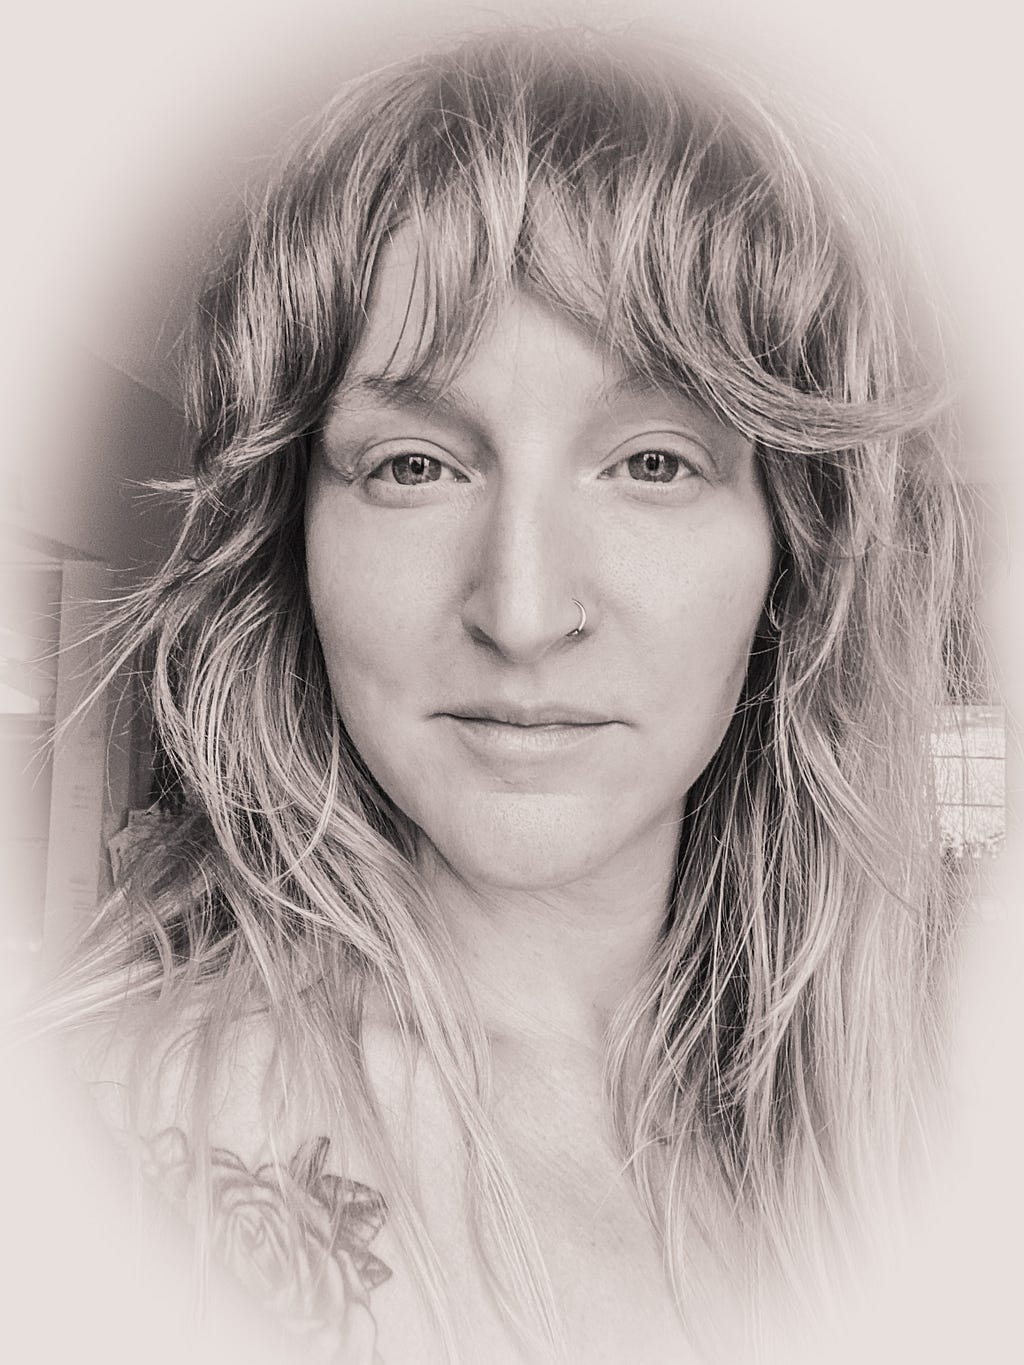 A black and white photograph of the author on date of publishing, hair wild and wispy, compassionate confidence radiating for her eyes